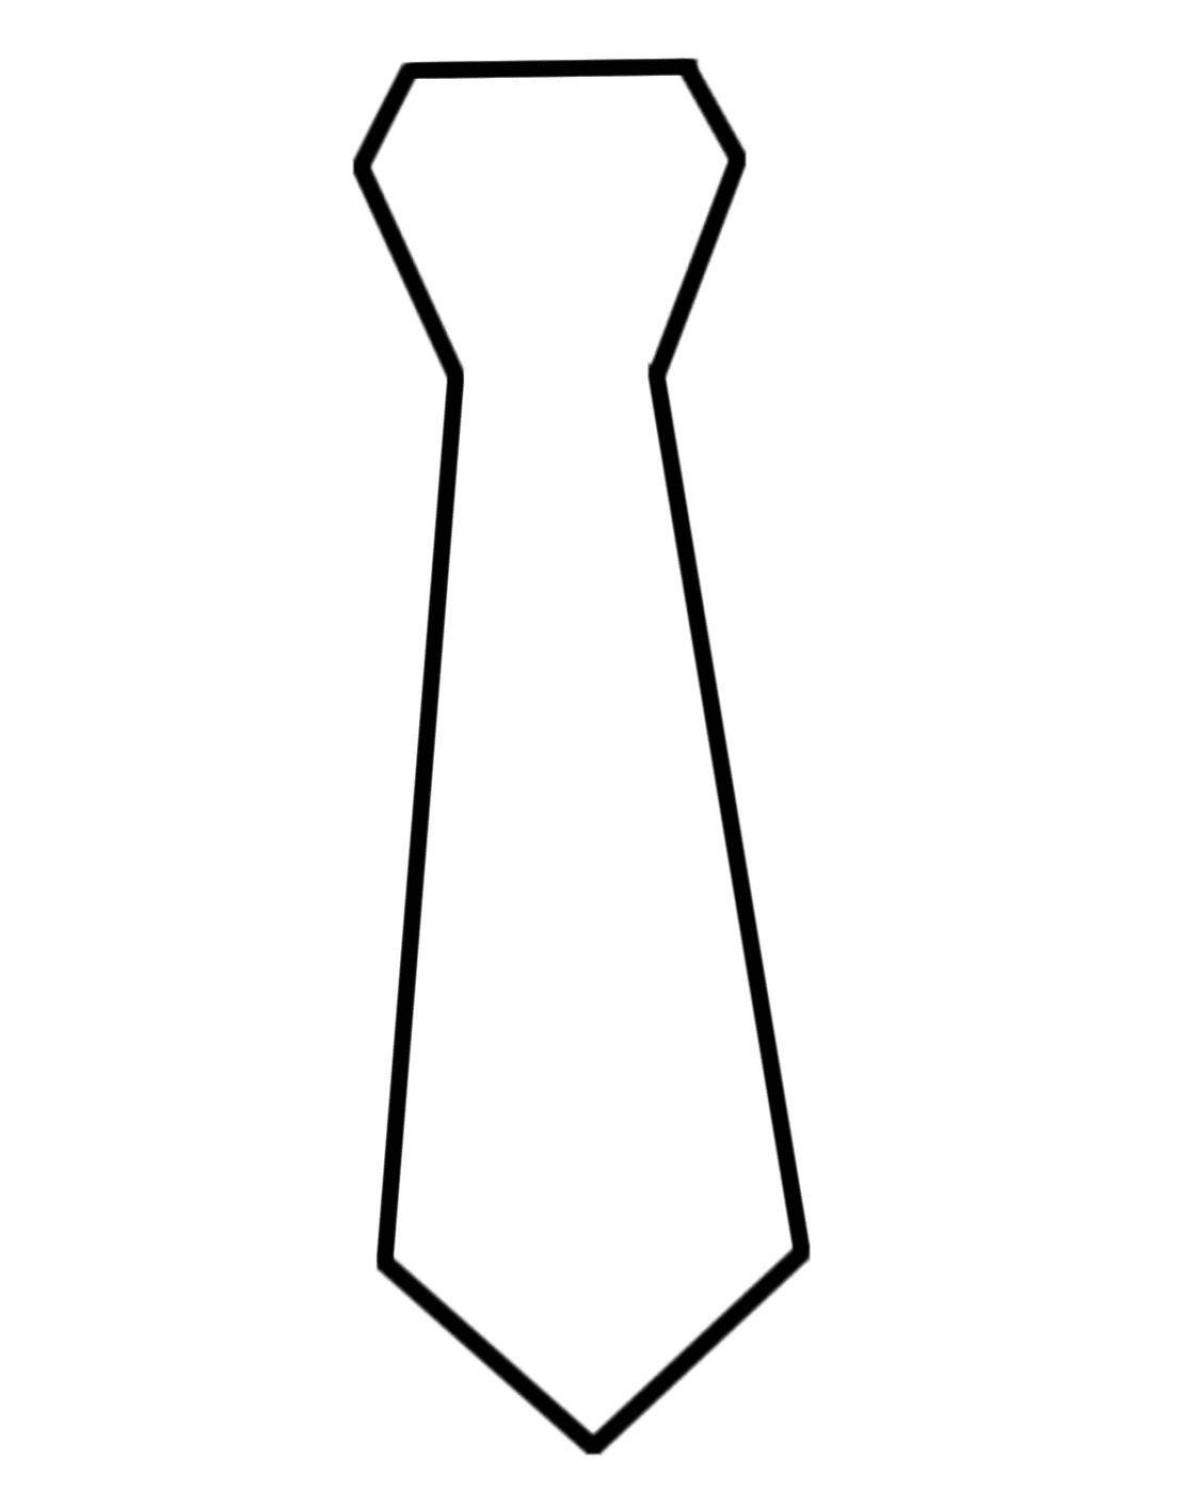 Coloring page stylish tie for dad